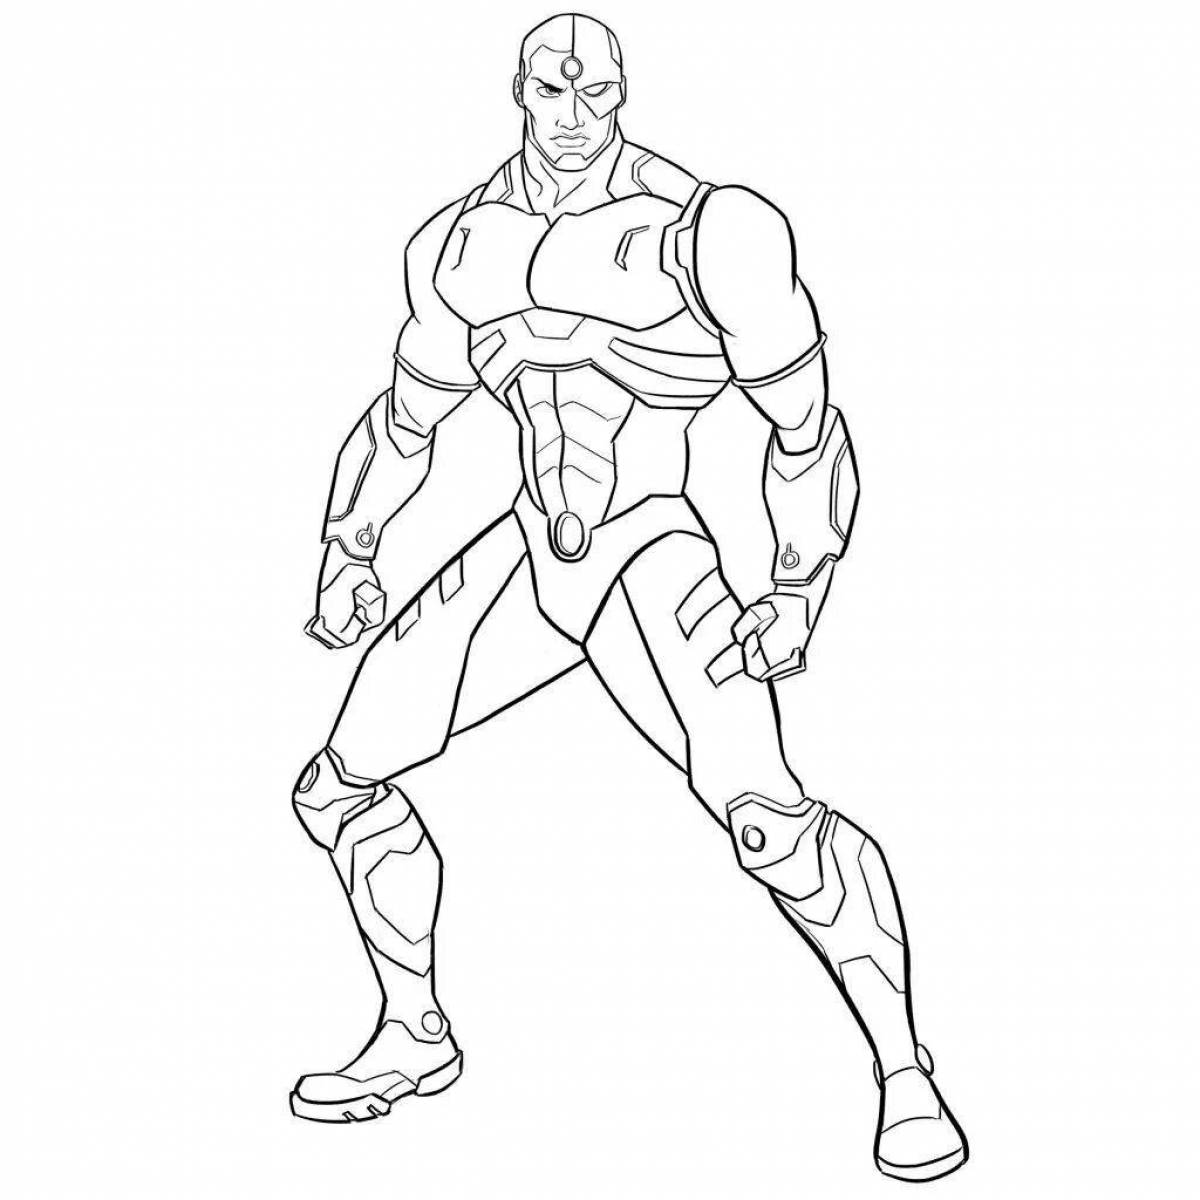 Glitter cyborg coloring page